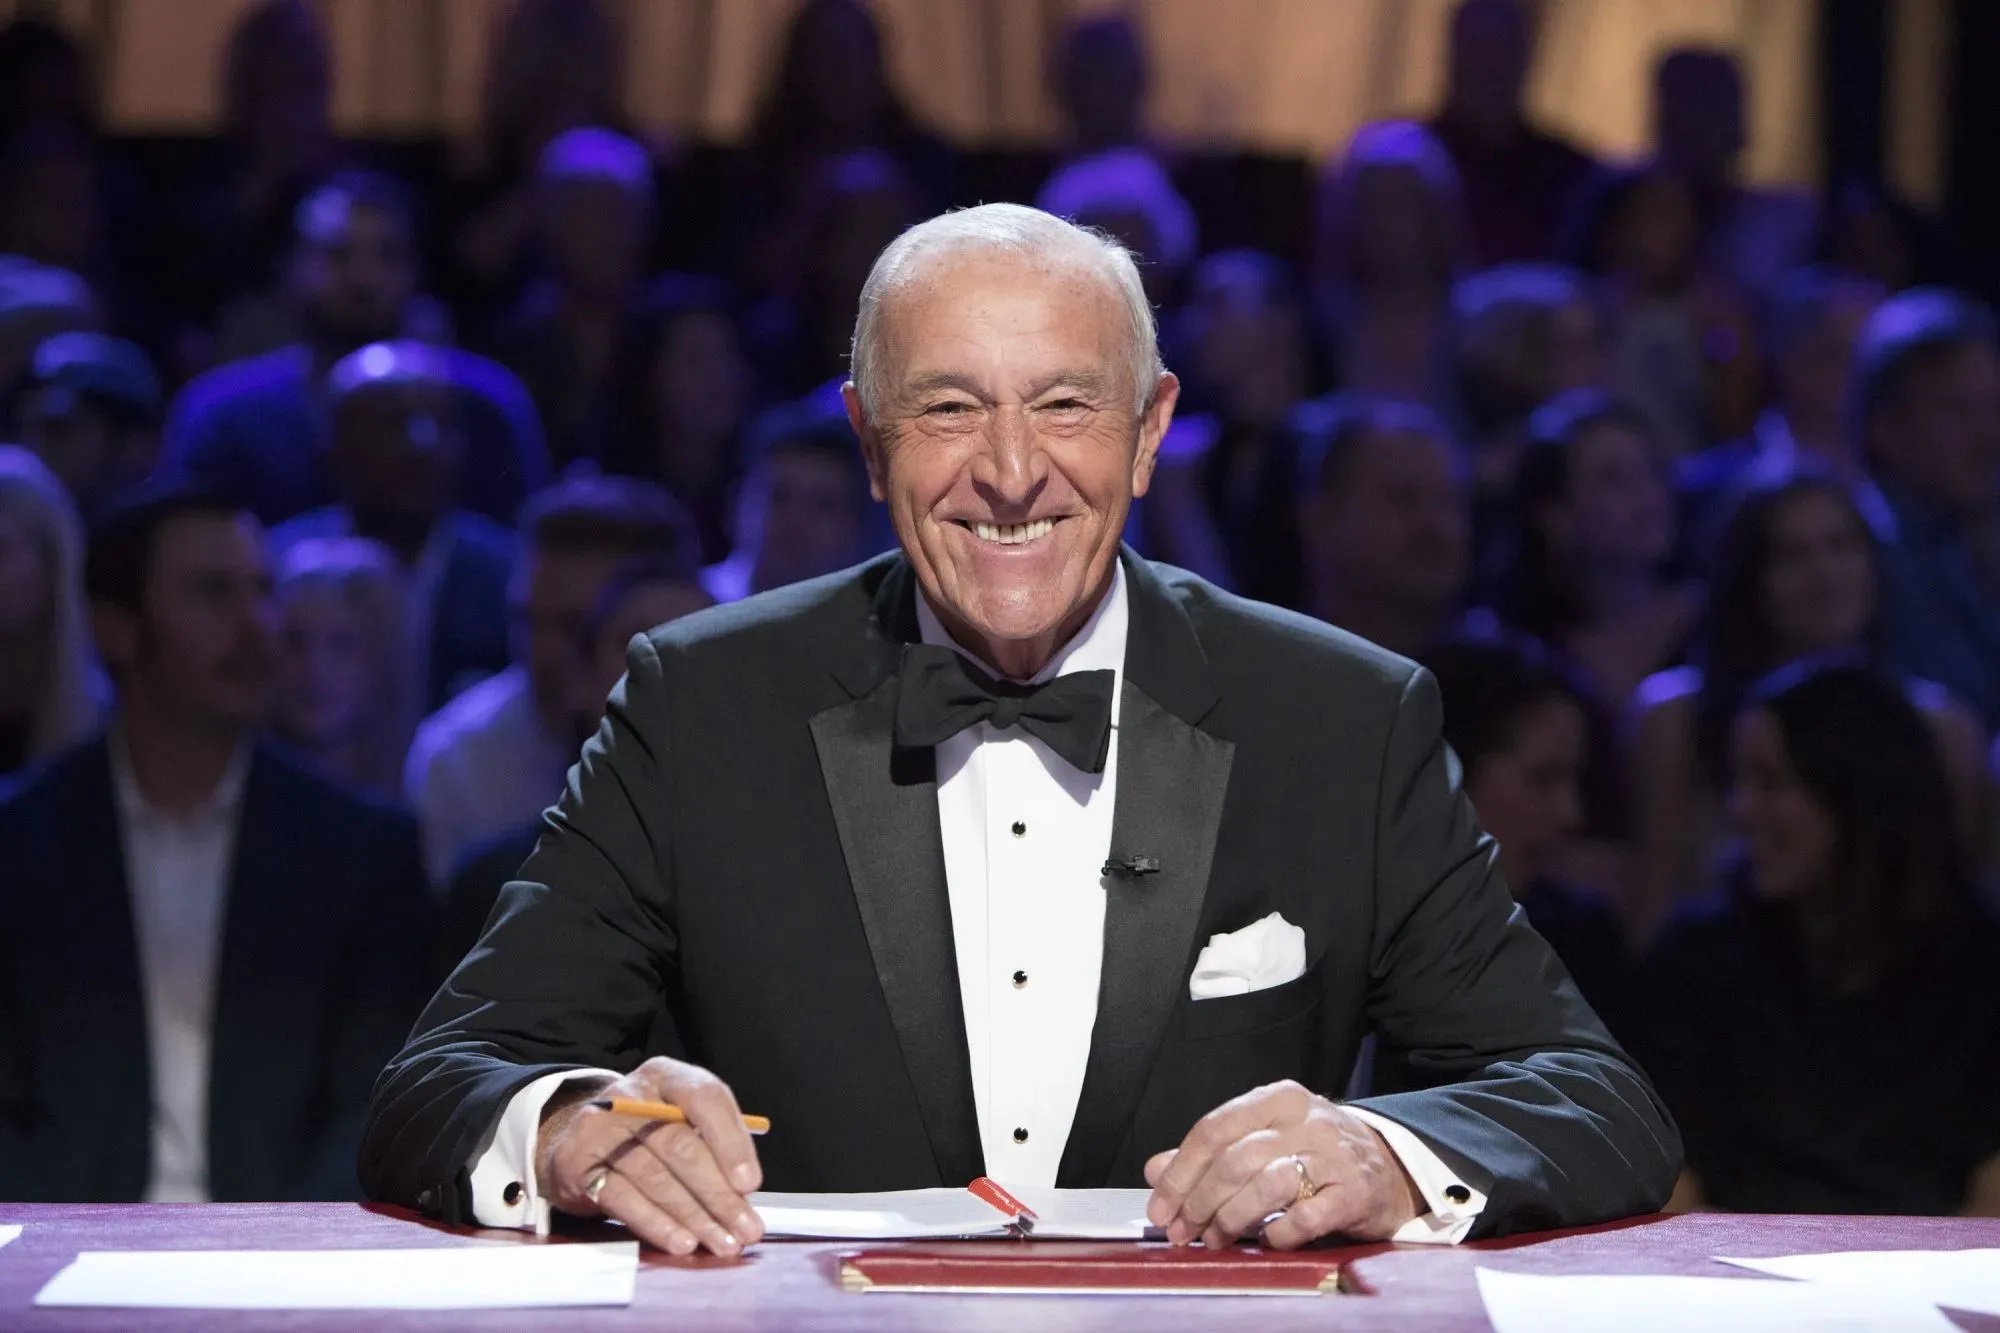 Dancing with the stars Judge Len Goodman Death, Age, Net Worth, Biography & More